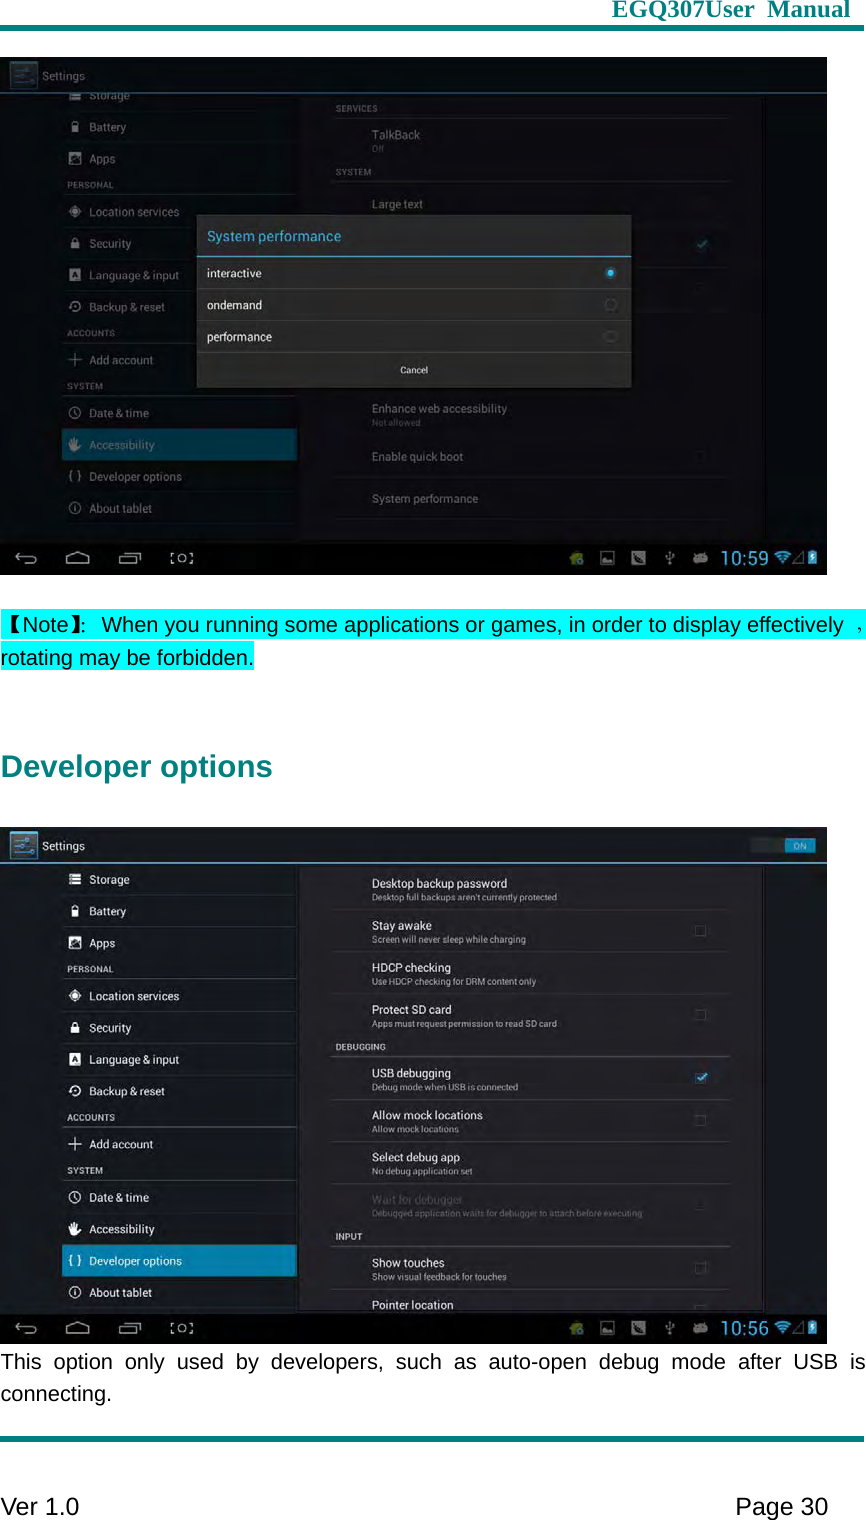                     EGQ307User Manual     Ver 1.0    Page 30    【Note】：When you running some applications or games, in order to display effectively  ，rotating may be forbidden.  Developer options  This option only used by developers, such as auto-open debug mode after USB is connecting. 